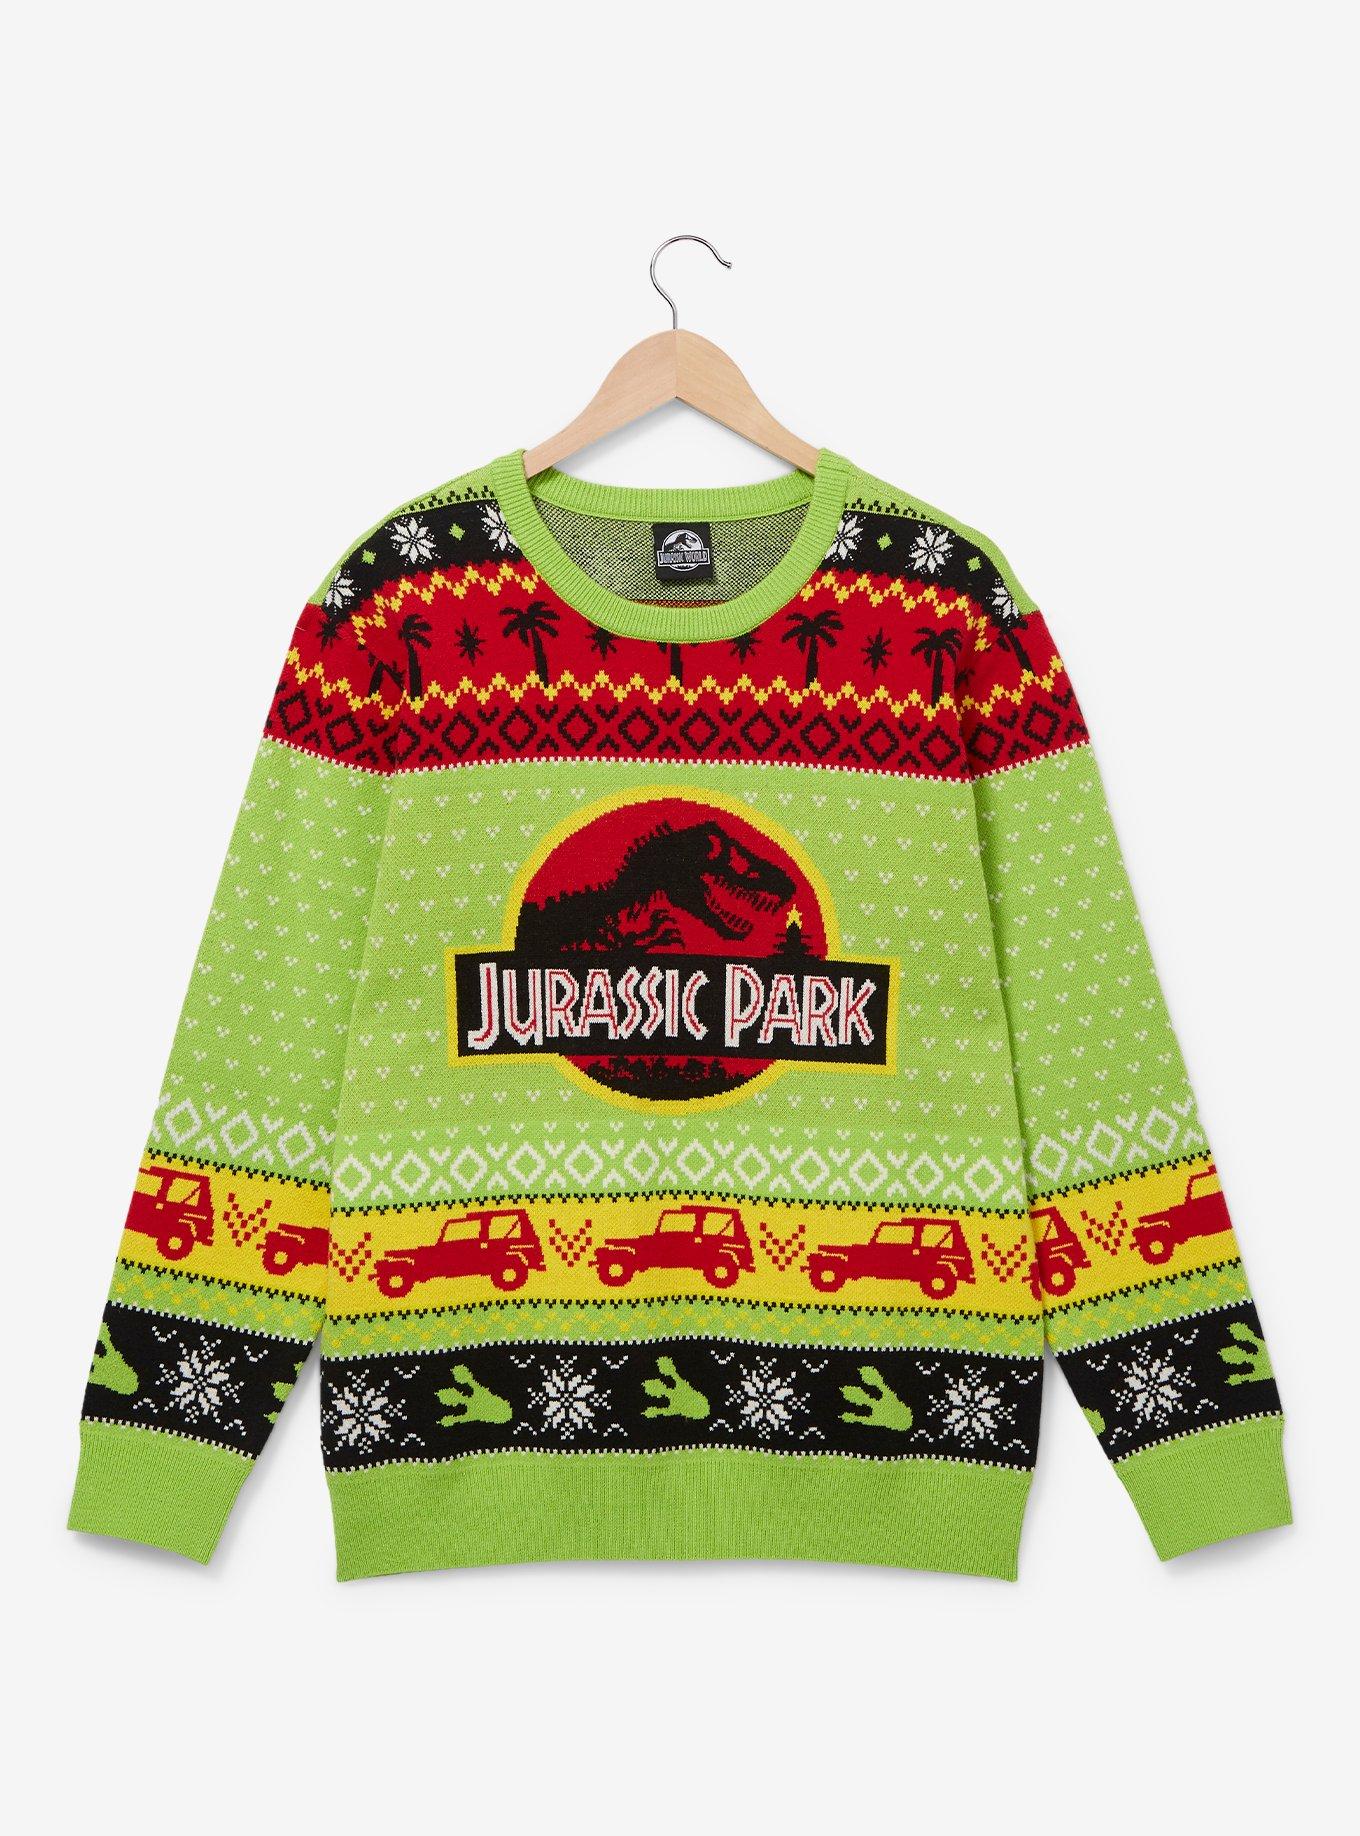 Jurassic Park Logo Patterned Holiday Sweater - BoxLunch Exclusive, GREEN, hi-res